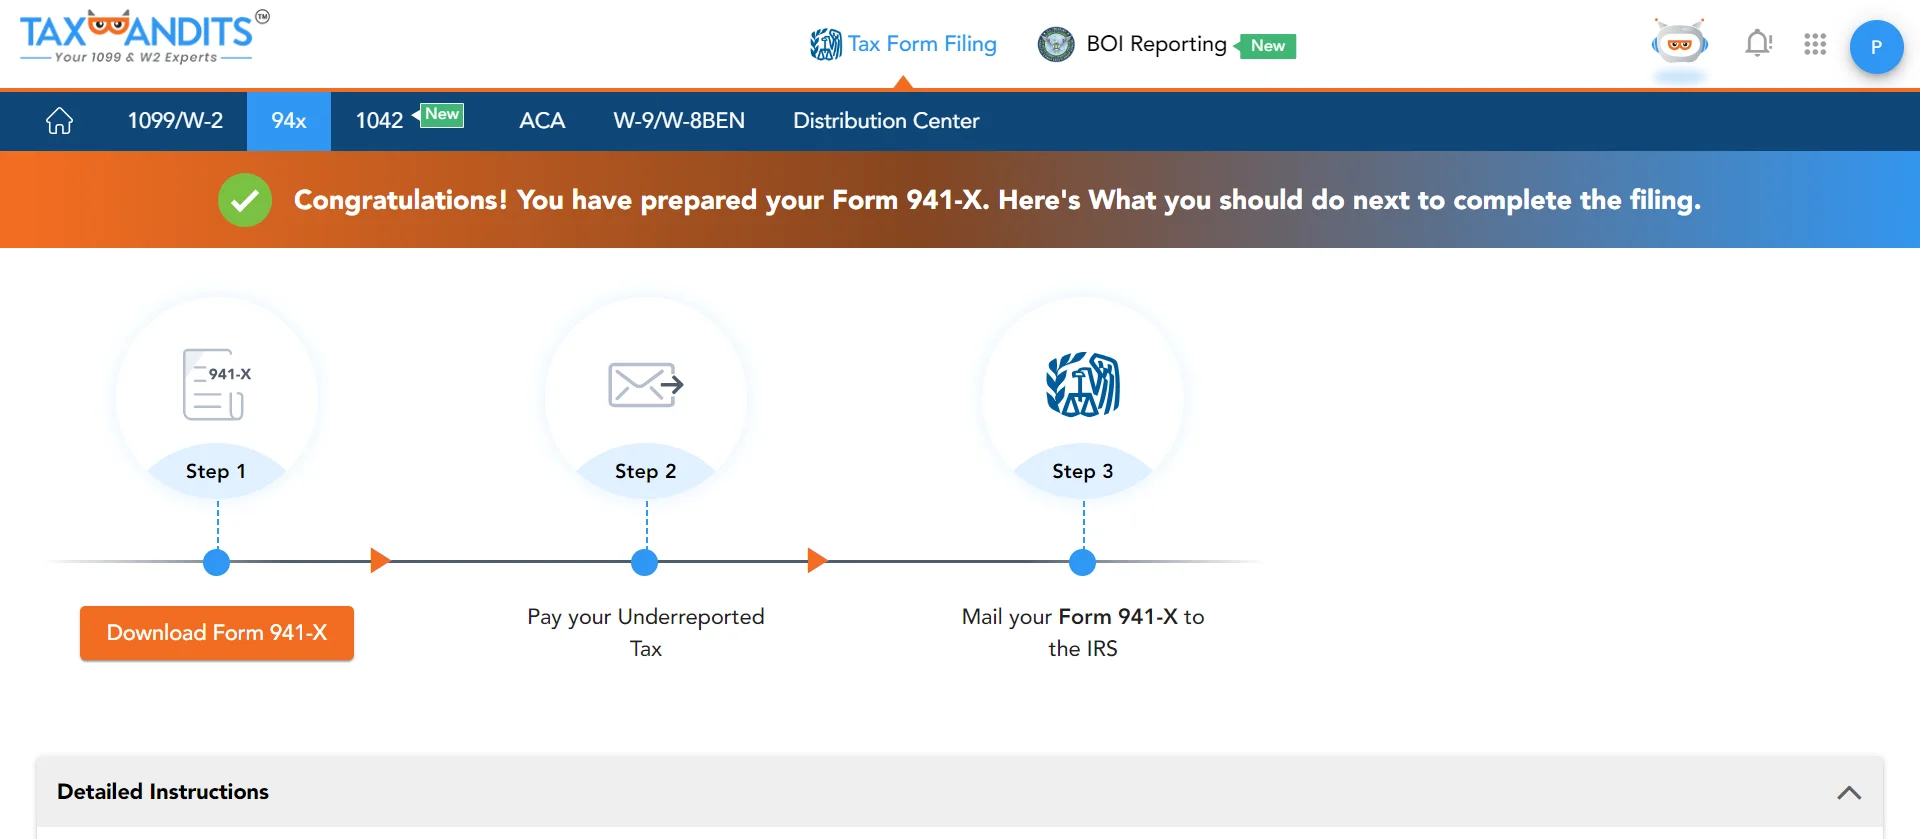  Download Form 941-X and send it to the IRS